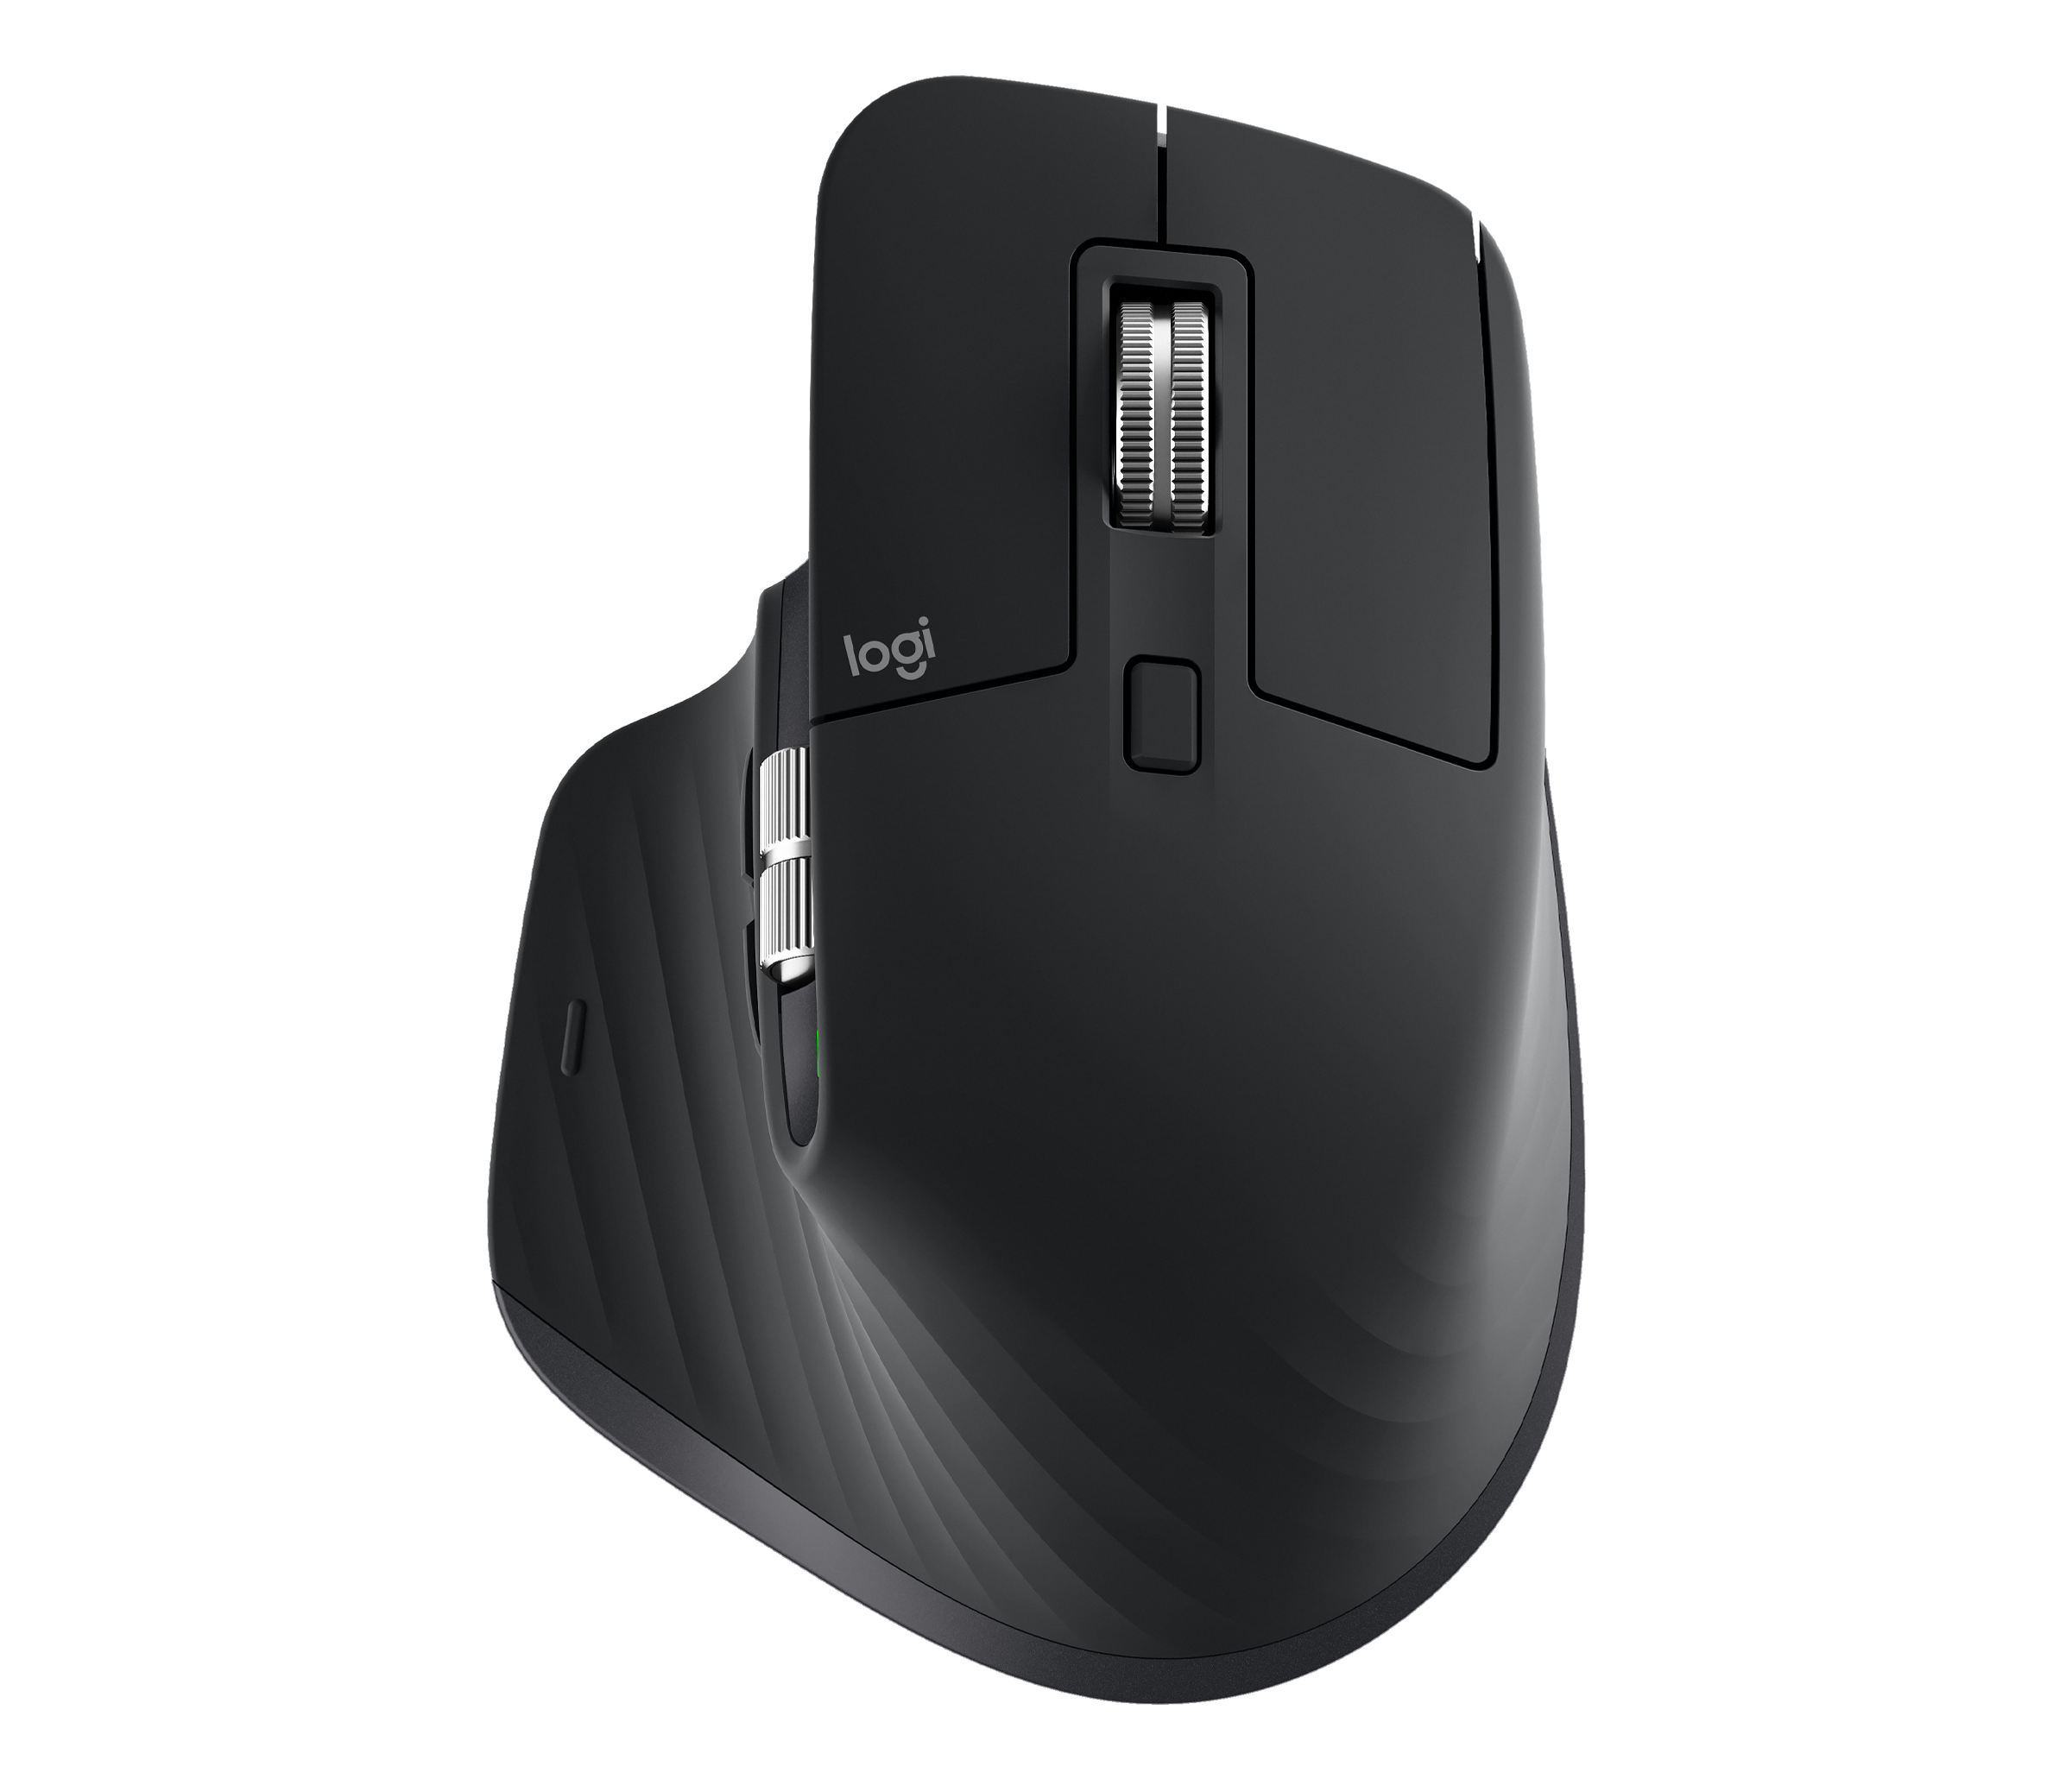 Logitech MX Master 3 Wireless Mouse with Fast Scroll Wheel